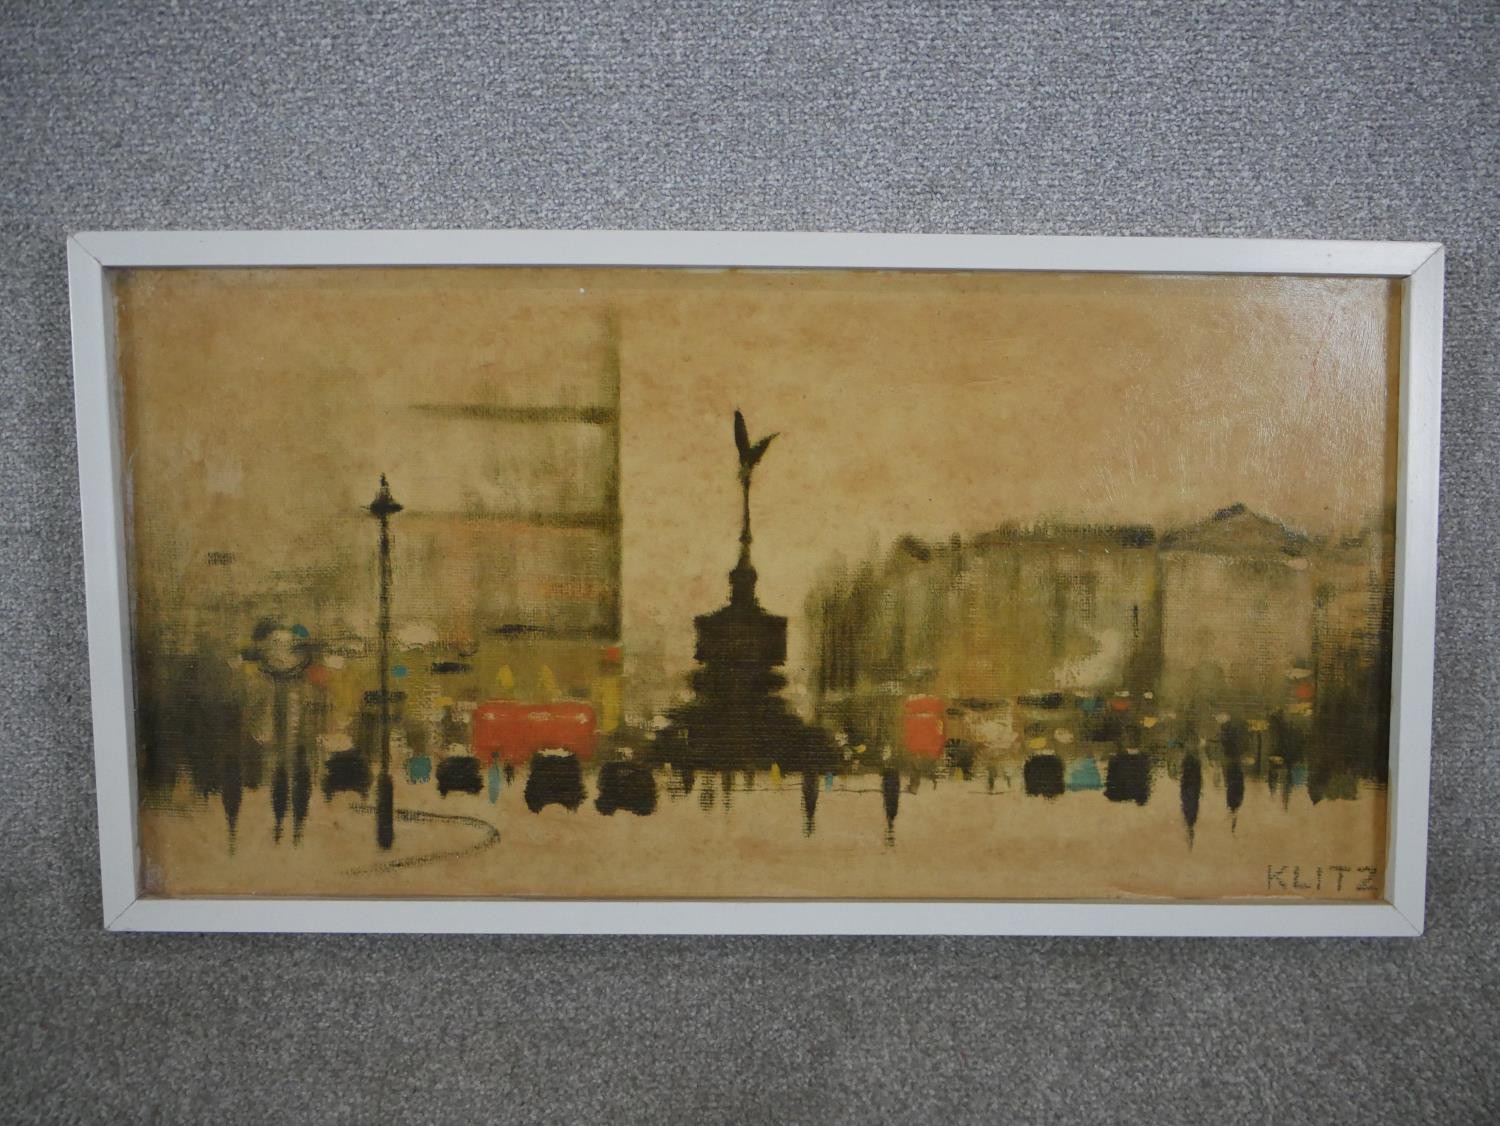 Tony Robert (Tony) Klitz (1917-2000), print of Piccadilly Circus oil on canvas, signed in plate - Image 2 of 5